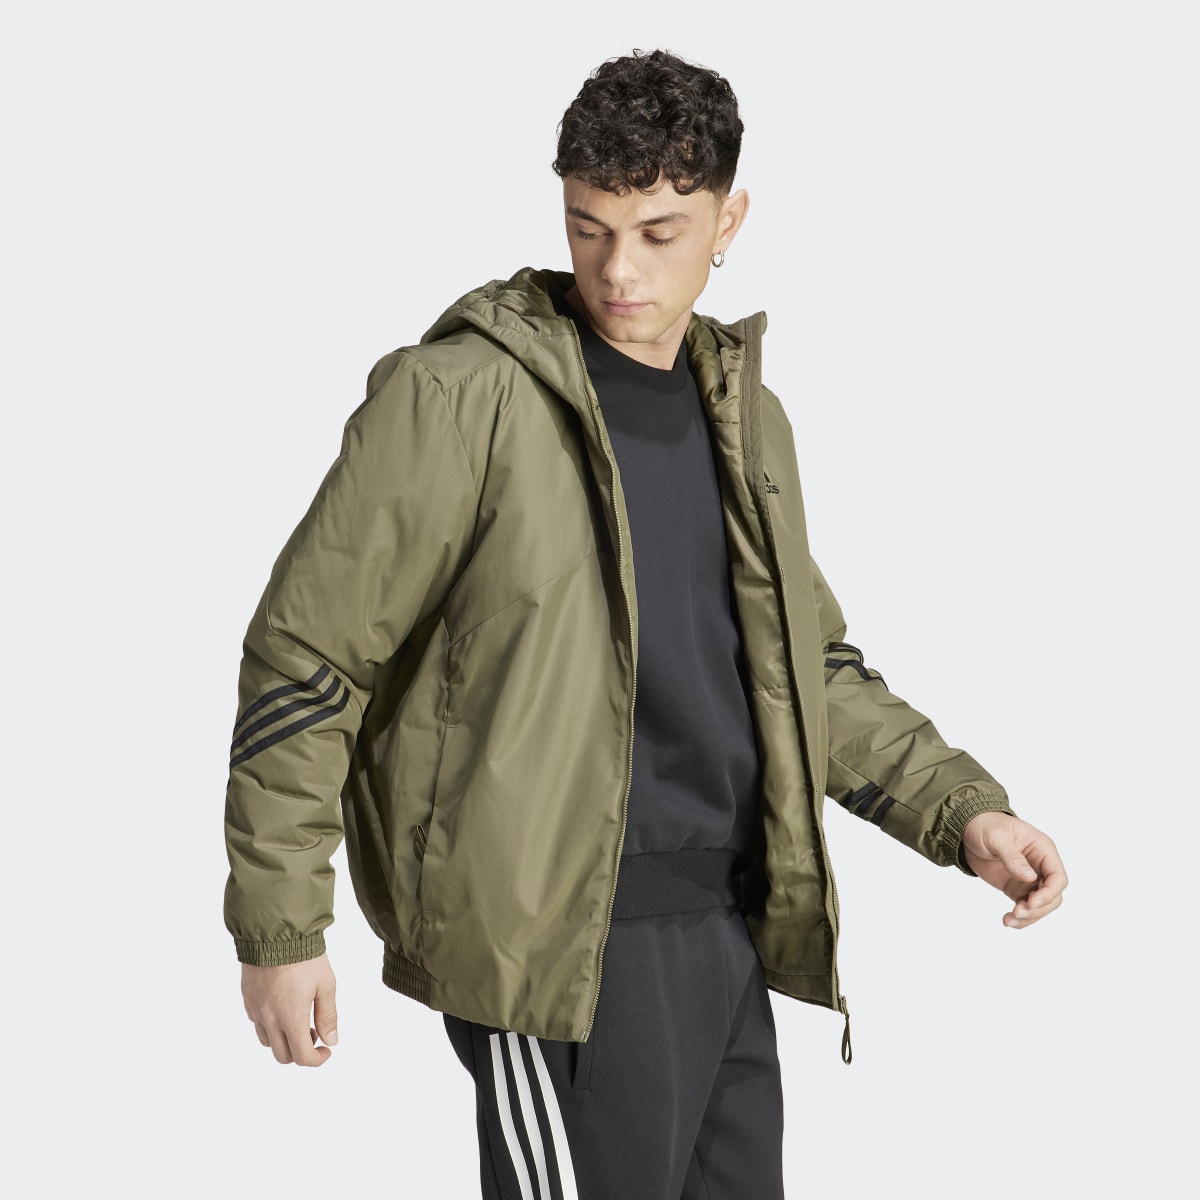 Adidas Back to Sport Hooded Jacket. 4